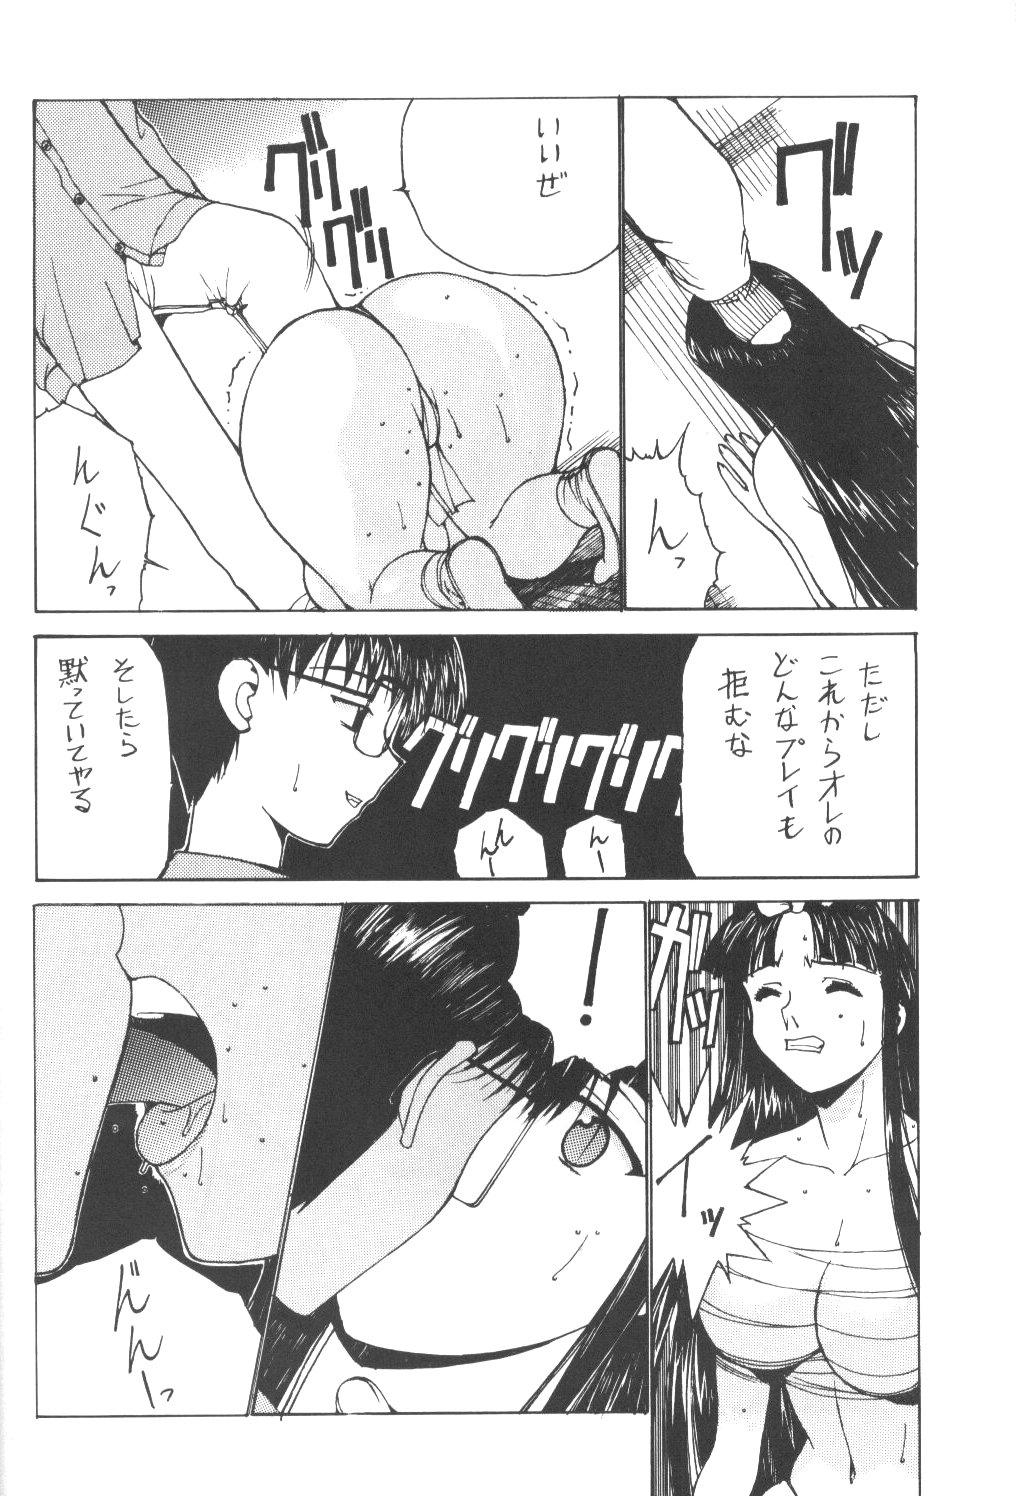 Whores Nadoriino Koufuku Ron - King of fighters Dead or alive Love hina Assfingering - Page 9